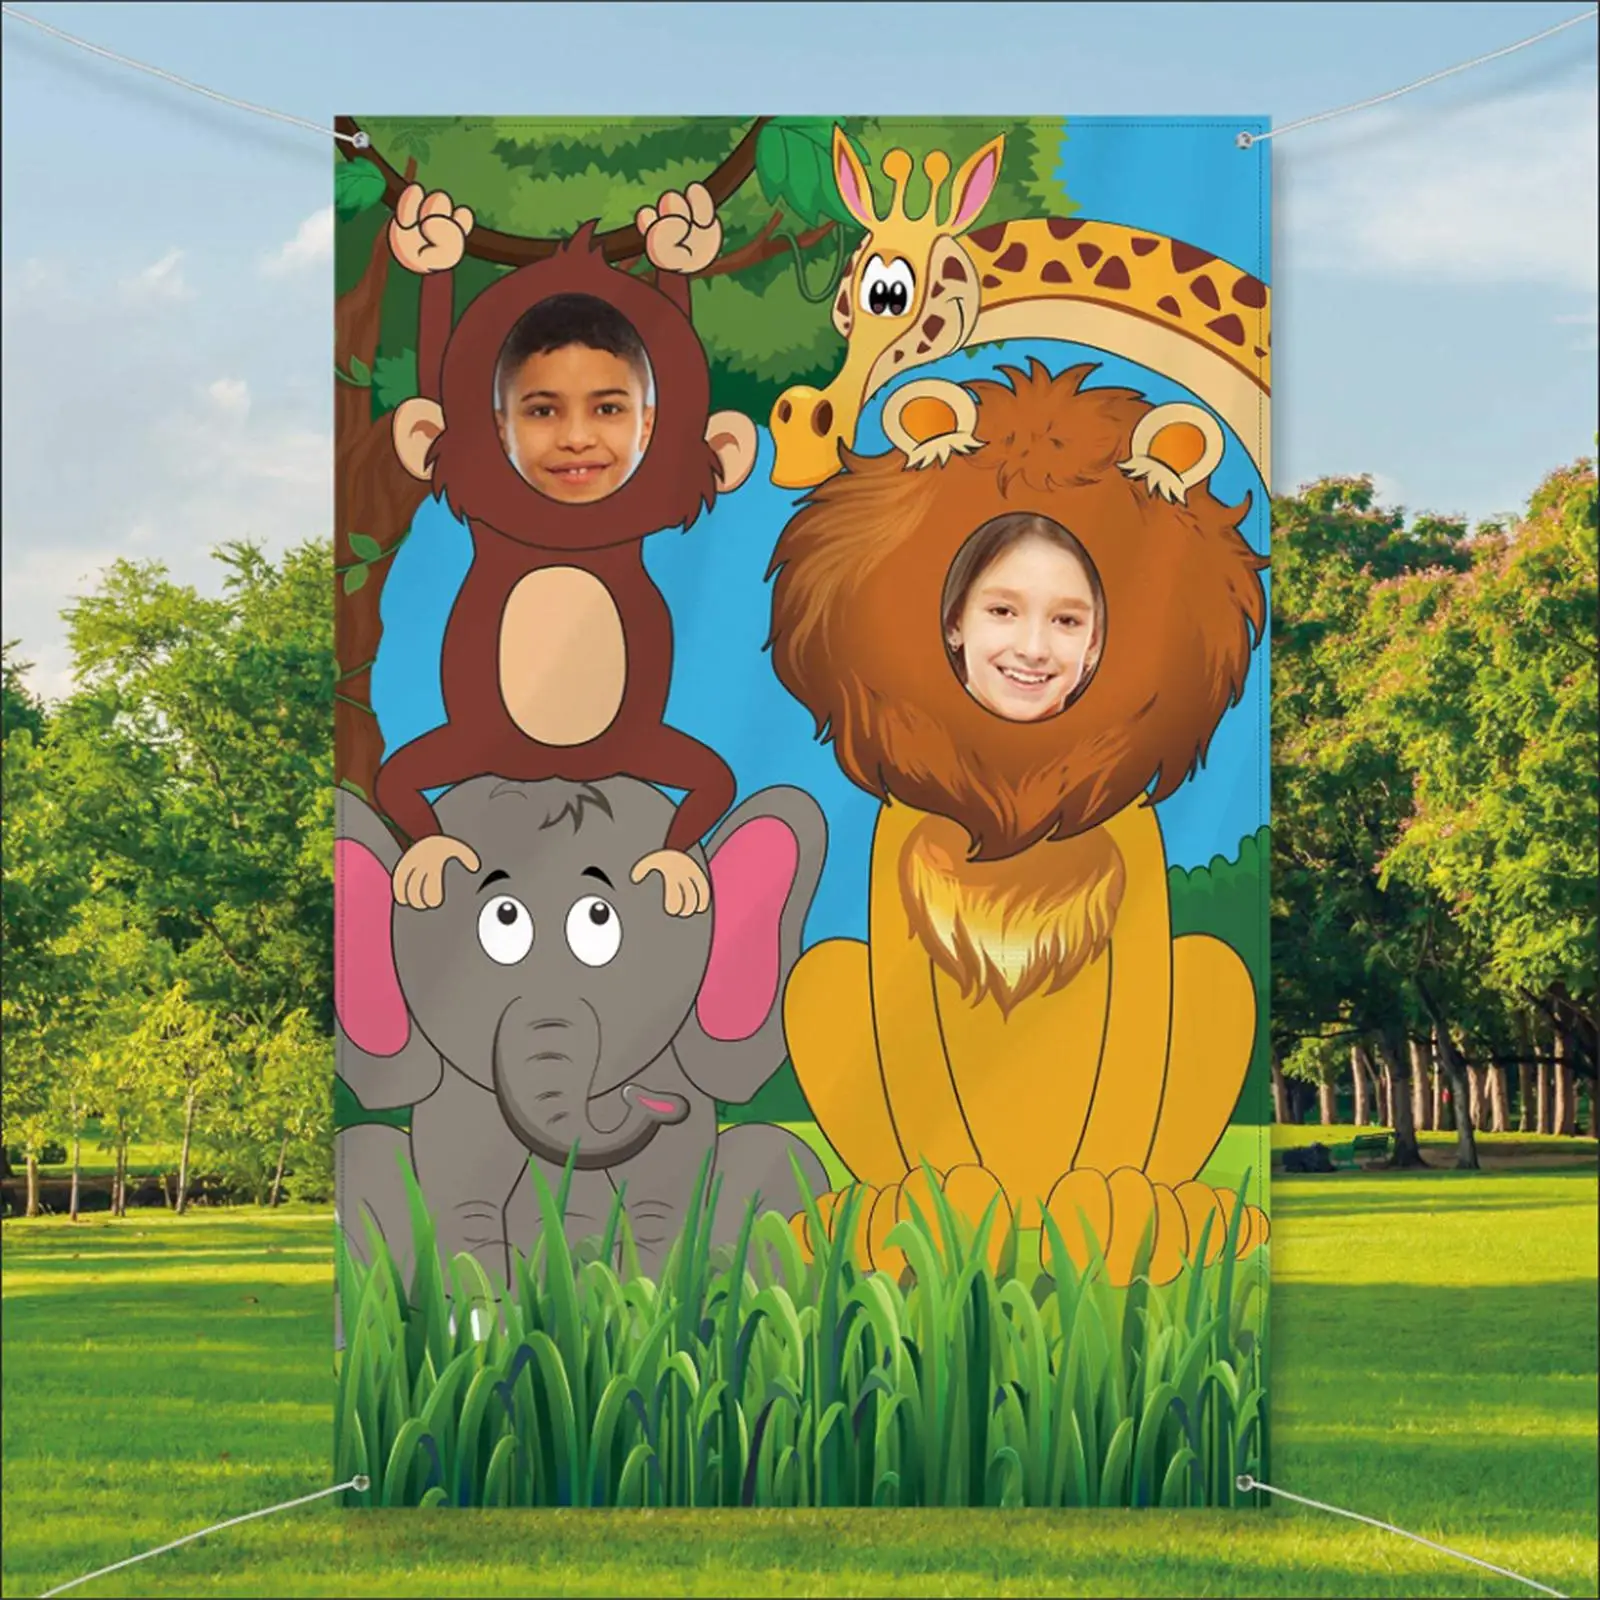 Jungle Animals Face in Hole Game Backdrop Door Banner 100x150cm Party Decorations